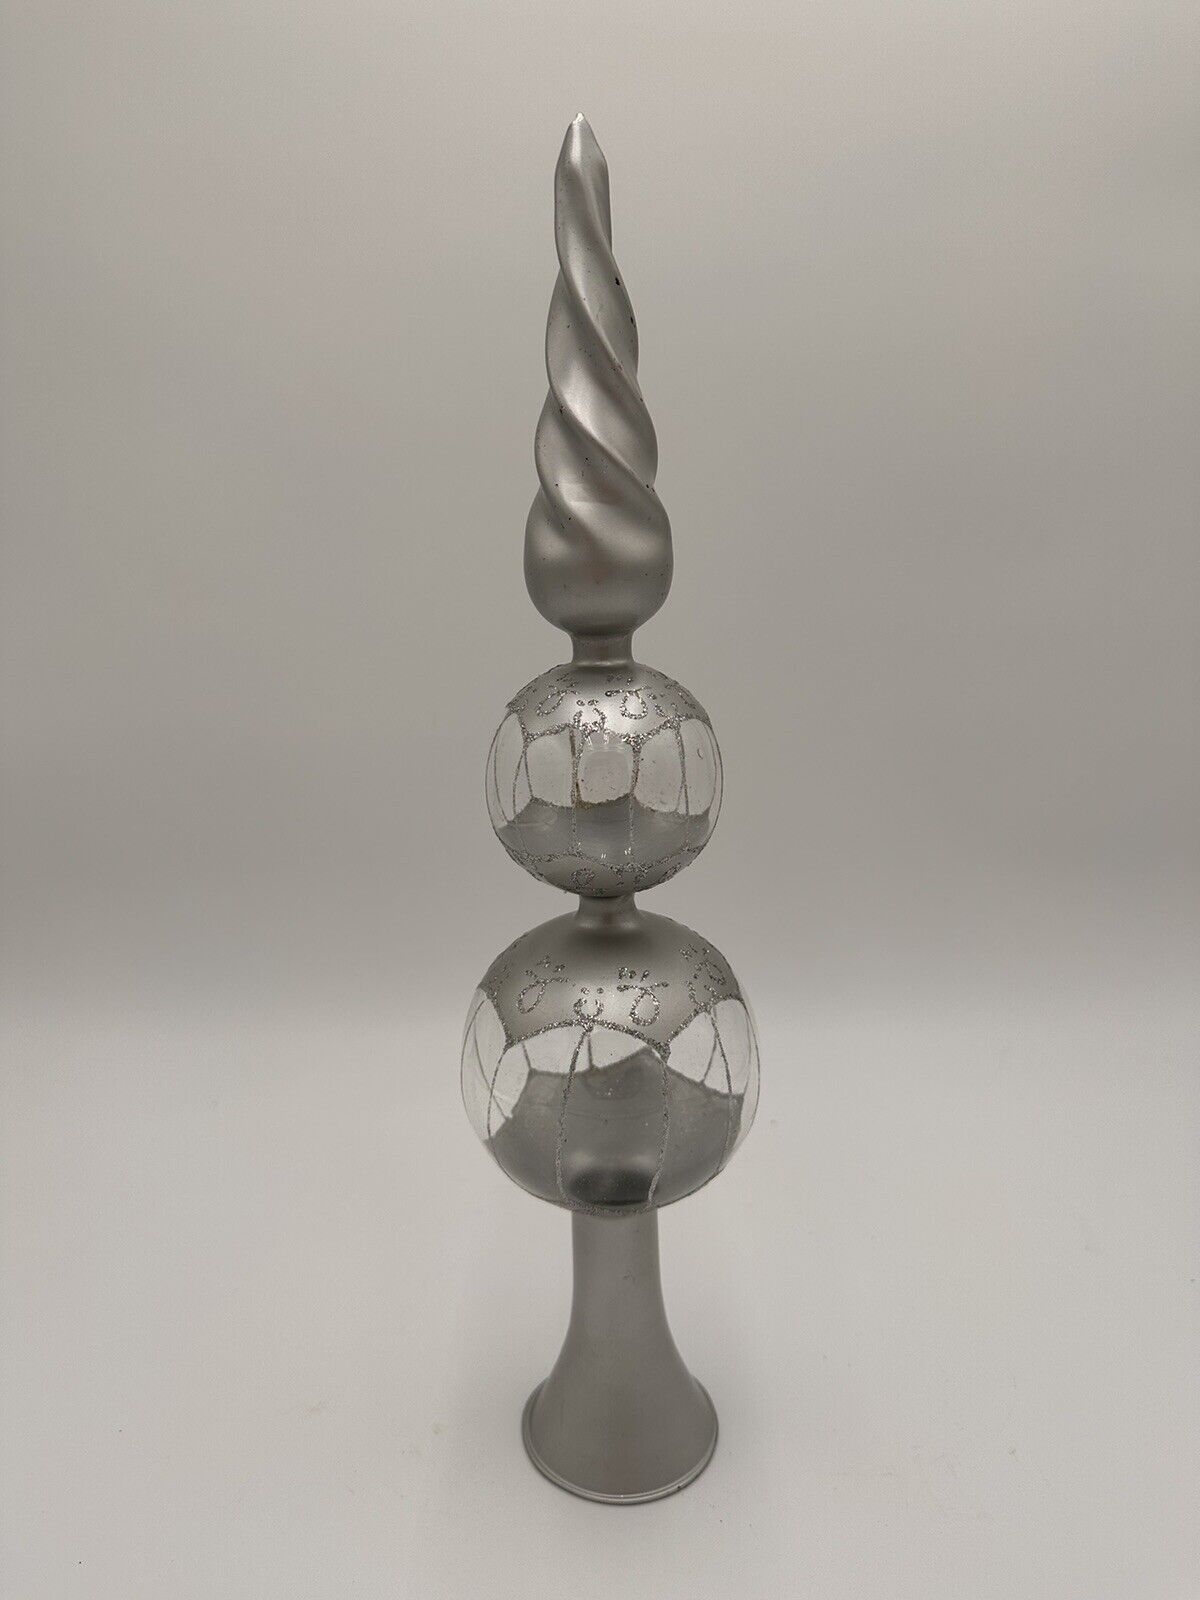 Vintage Handcrafted Glass Christmas Tree Top Finial Silver Retro Spiral Twist